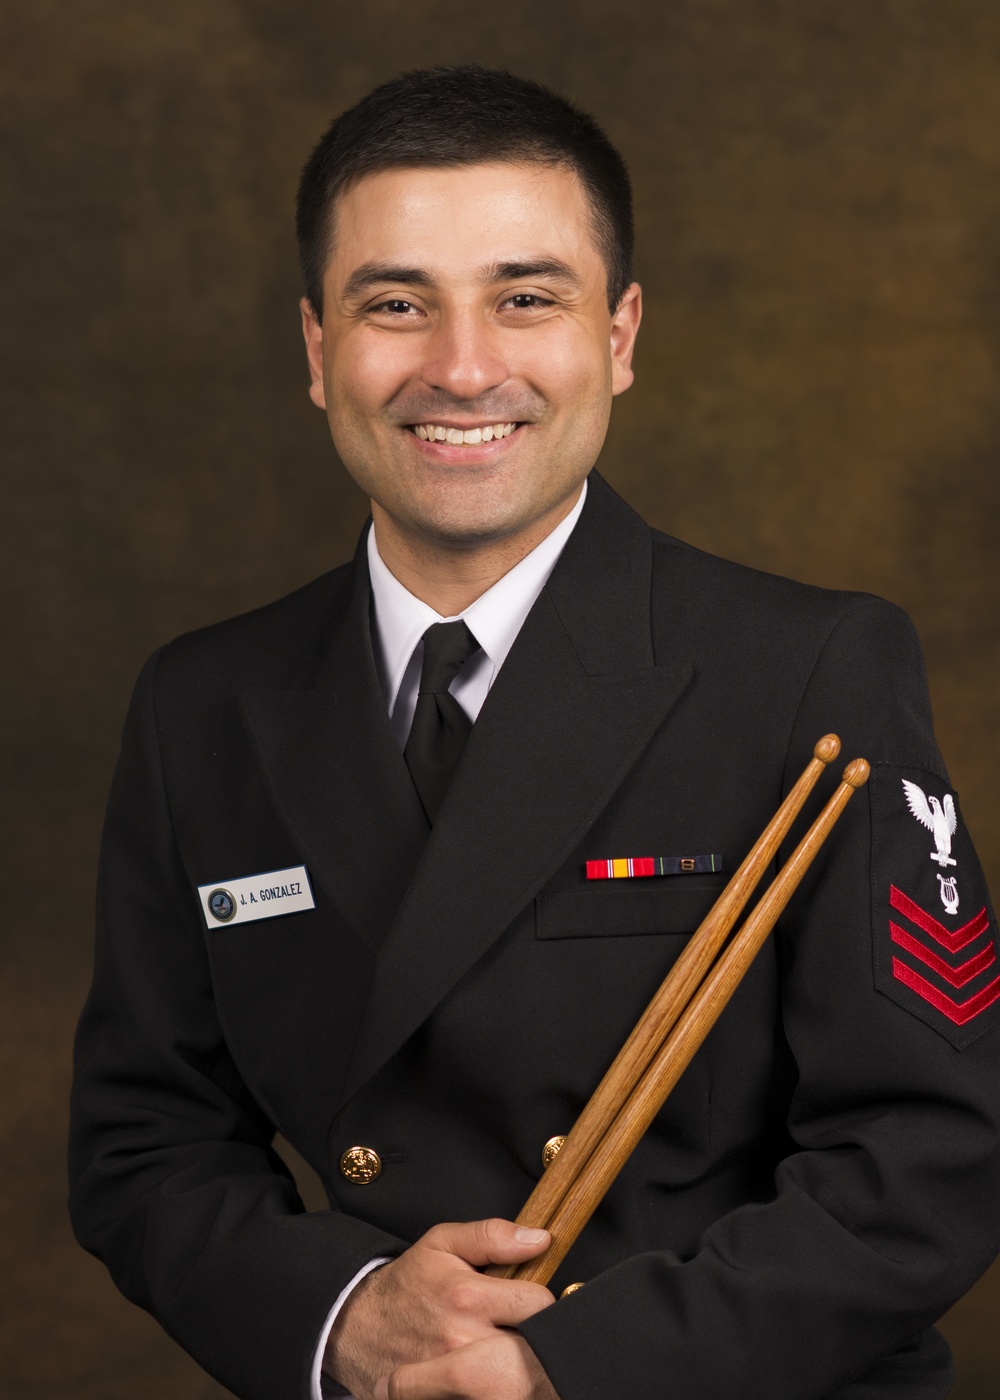 Navy Petty Officer 1st Class Gonzalez supports the 58th Presidential Inauguration